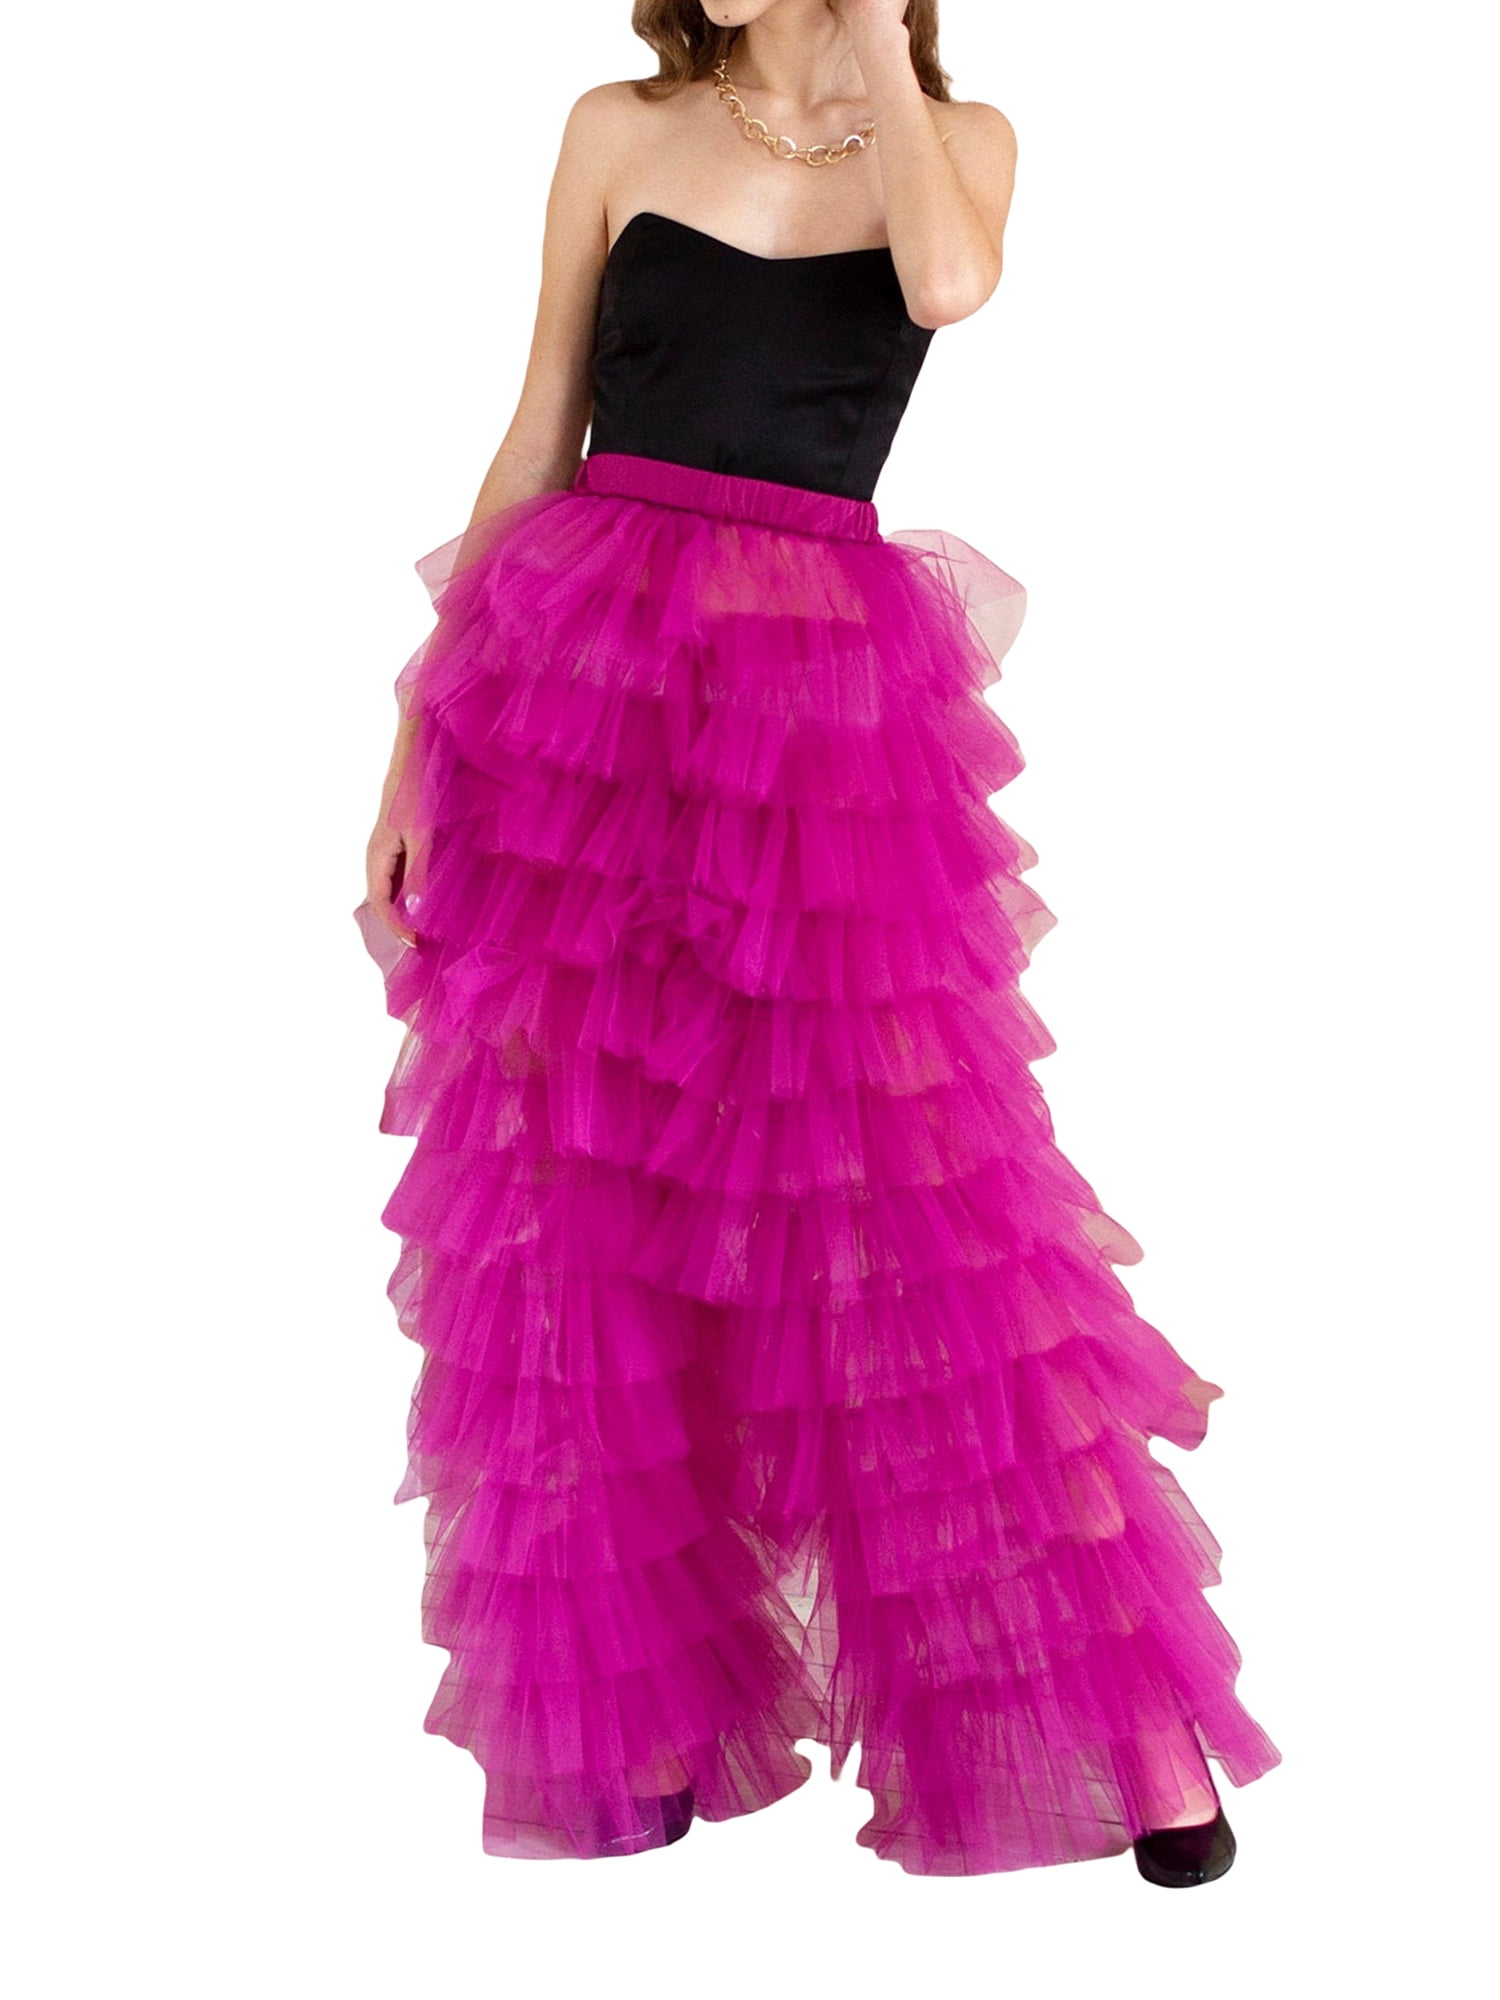 Women's Tulle Pants Puffy Solid Color Multi-Layer Ruffle Yarn High